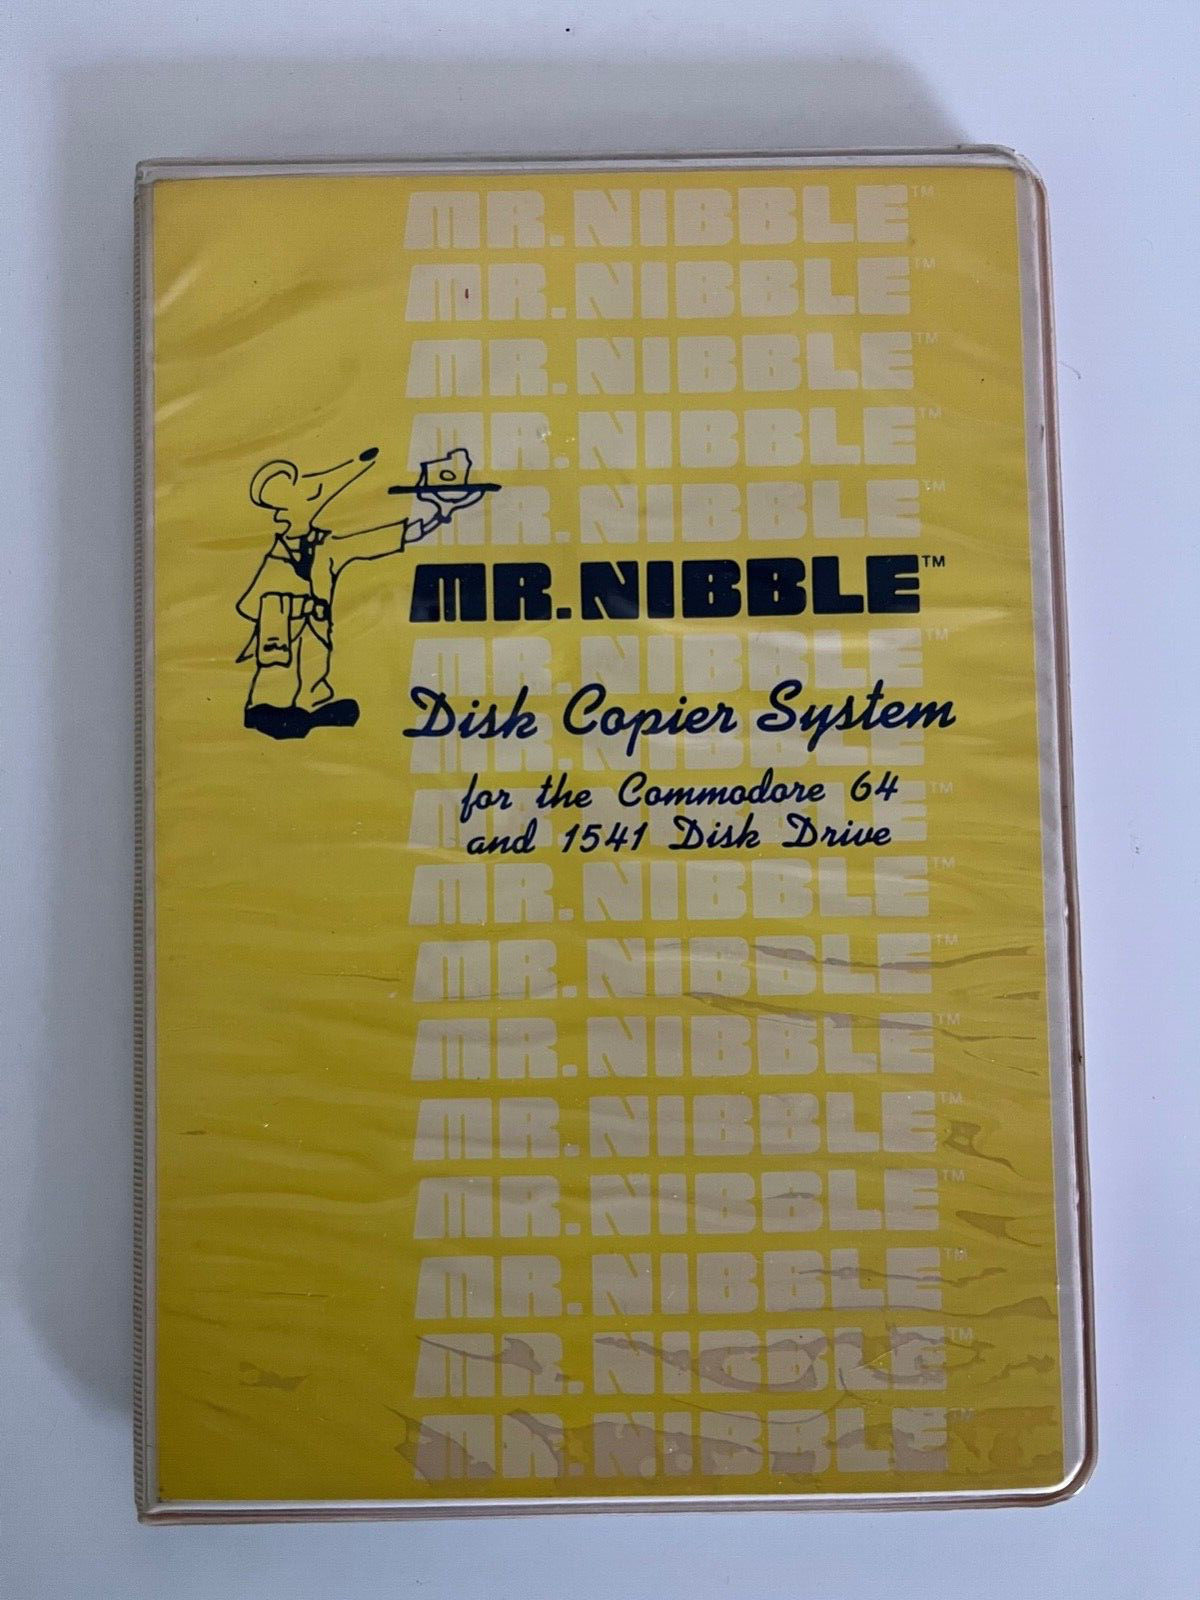 Mr Nibble Vintage Disk Copier System For Commodore 64 Computer 1541 Disk Drive